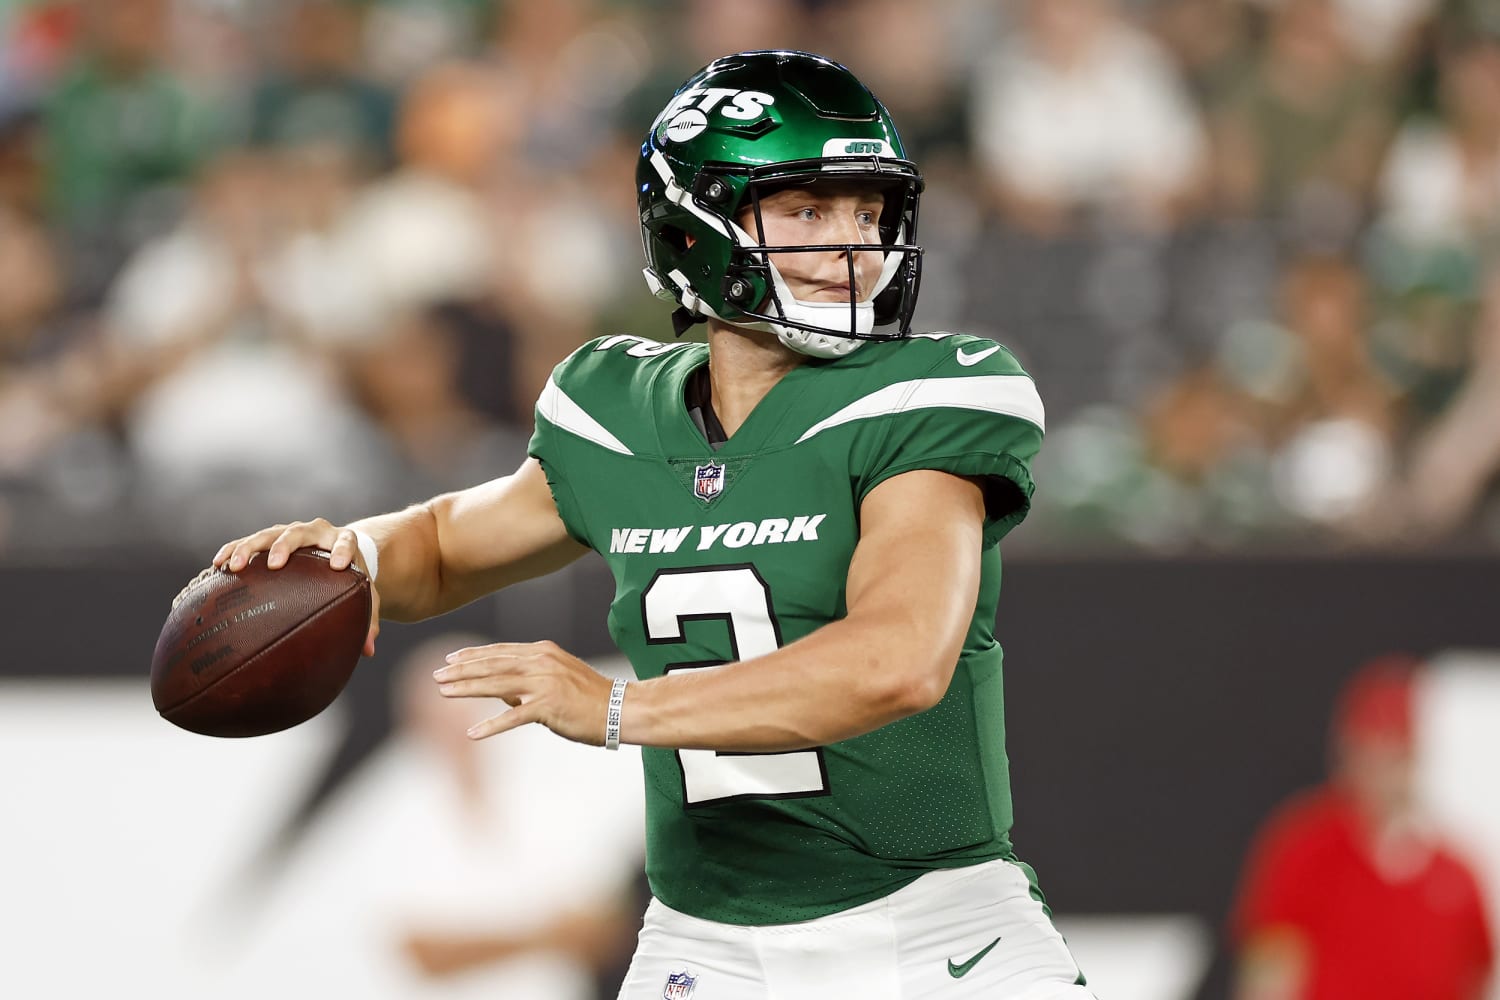 All About Jets QB Zach Wilson, Aaron Rodgers' Replacement